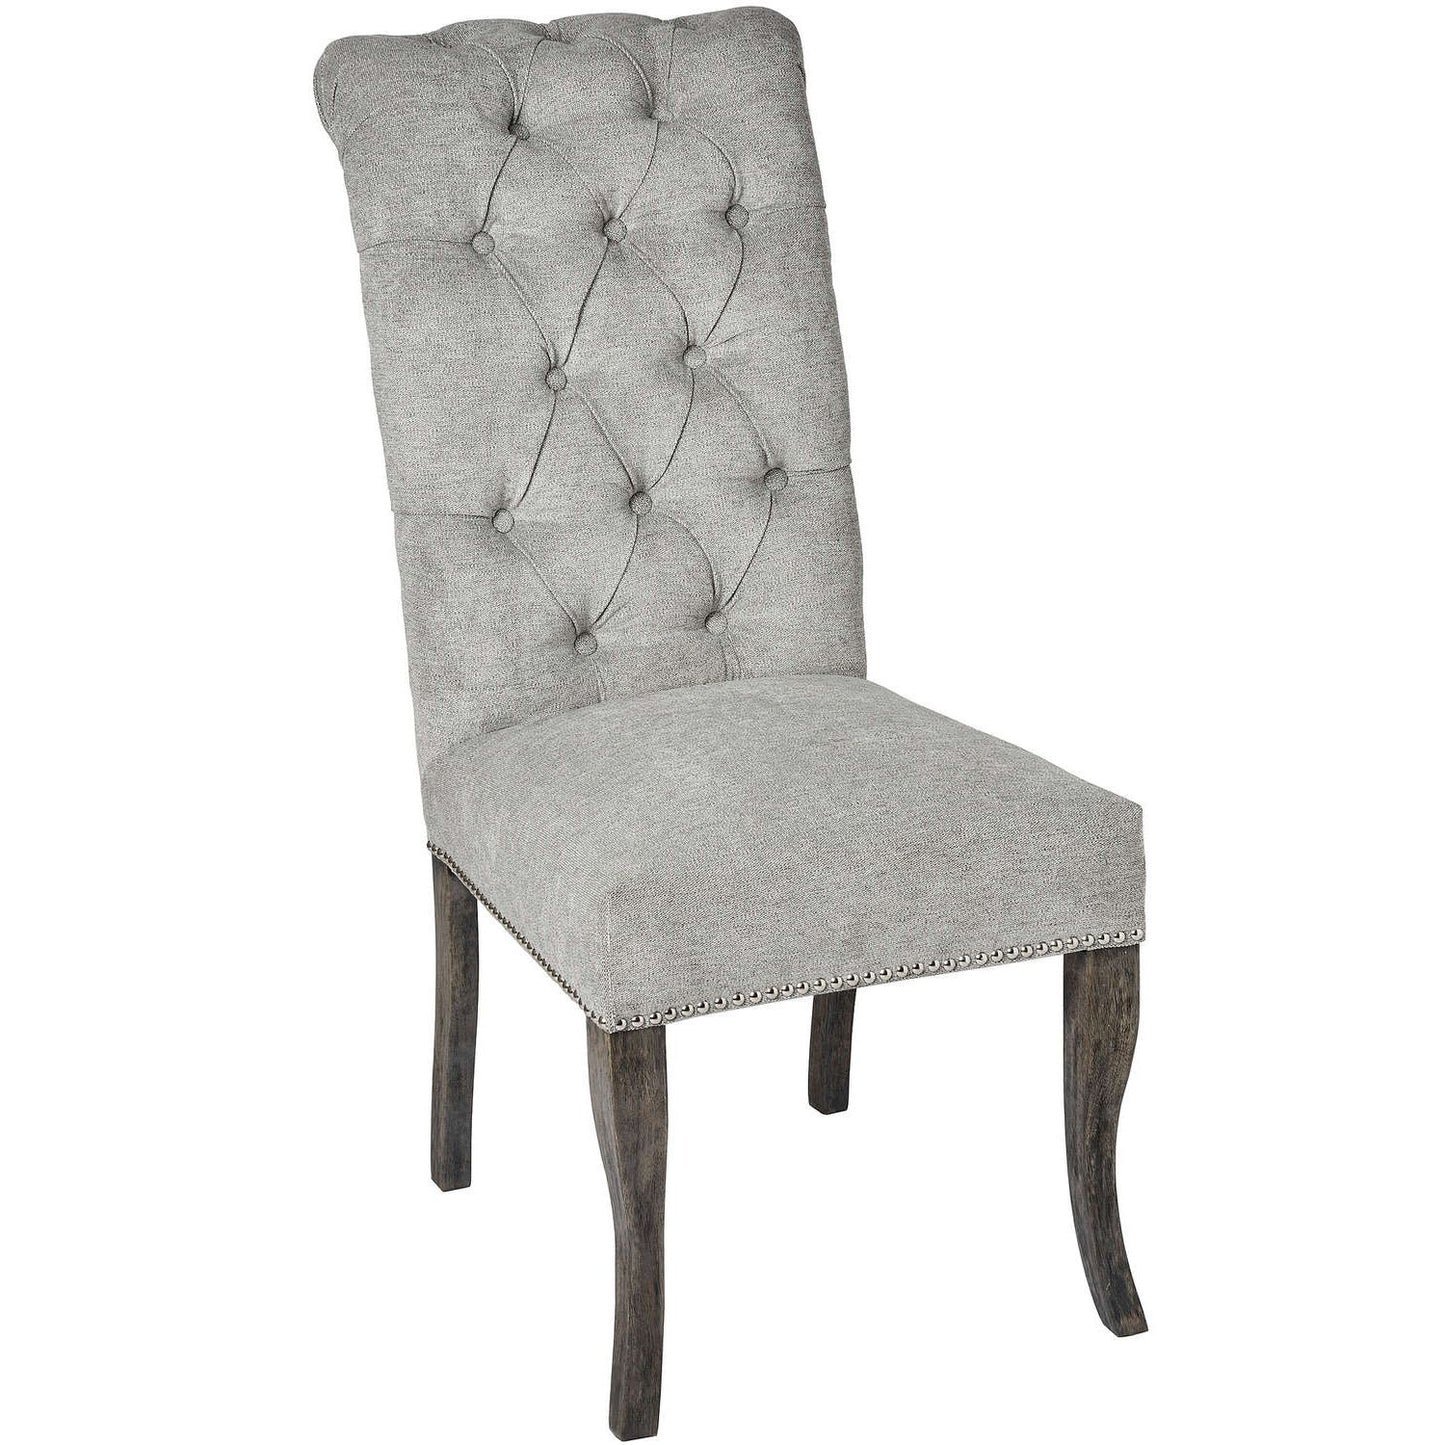 Silver roll top dining chair with ring pull